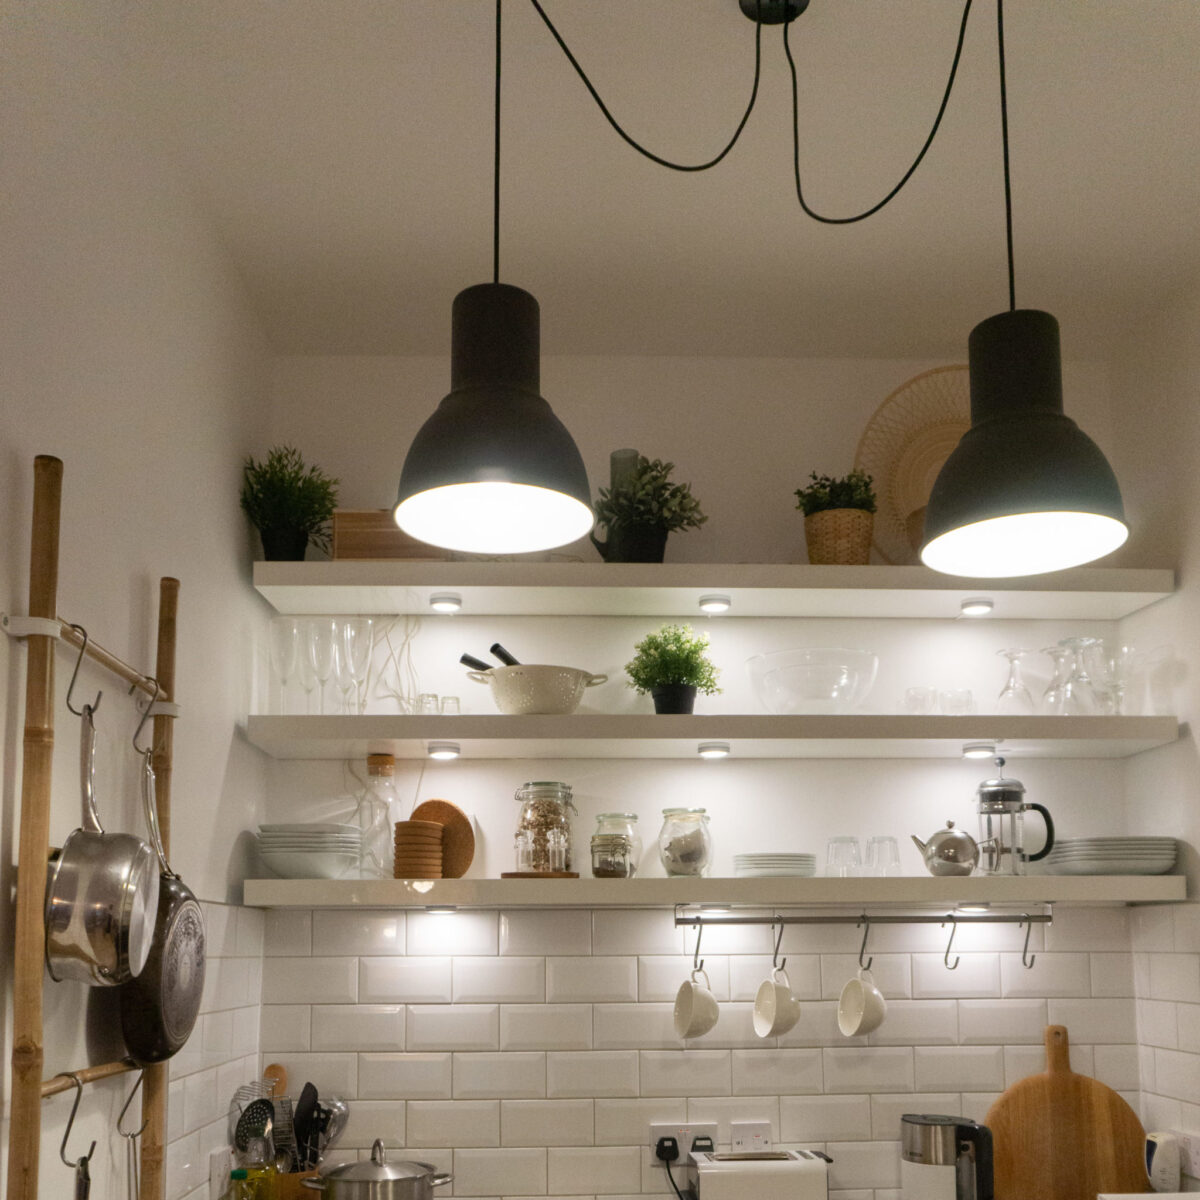 Modern open shelved kitchen with utensils, hanging lights and white tiles.